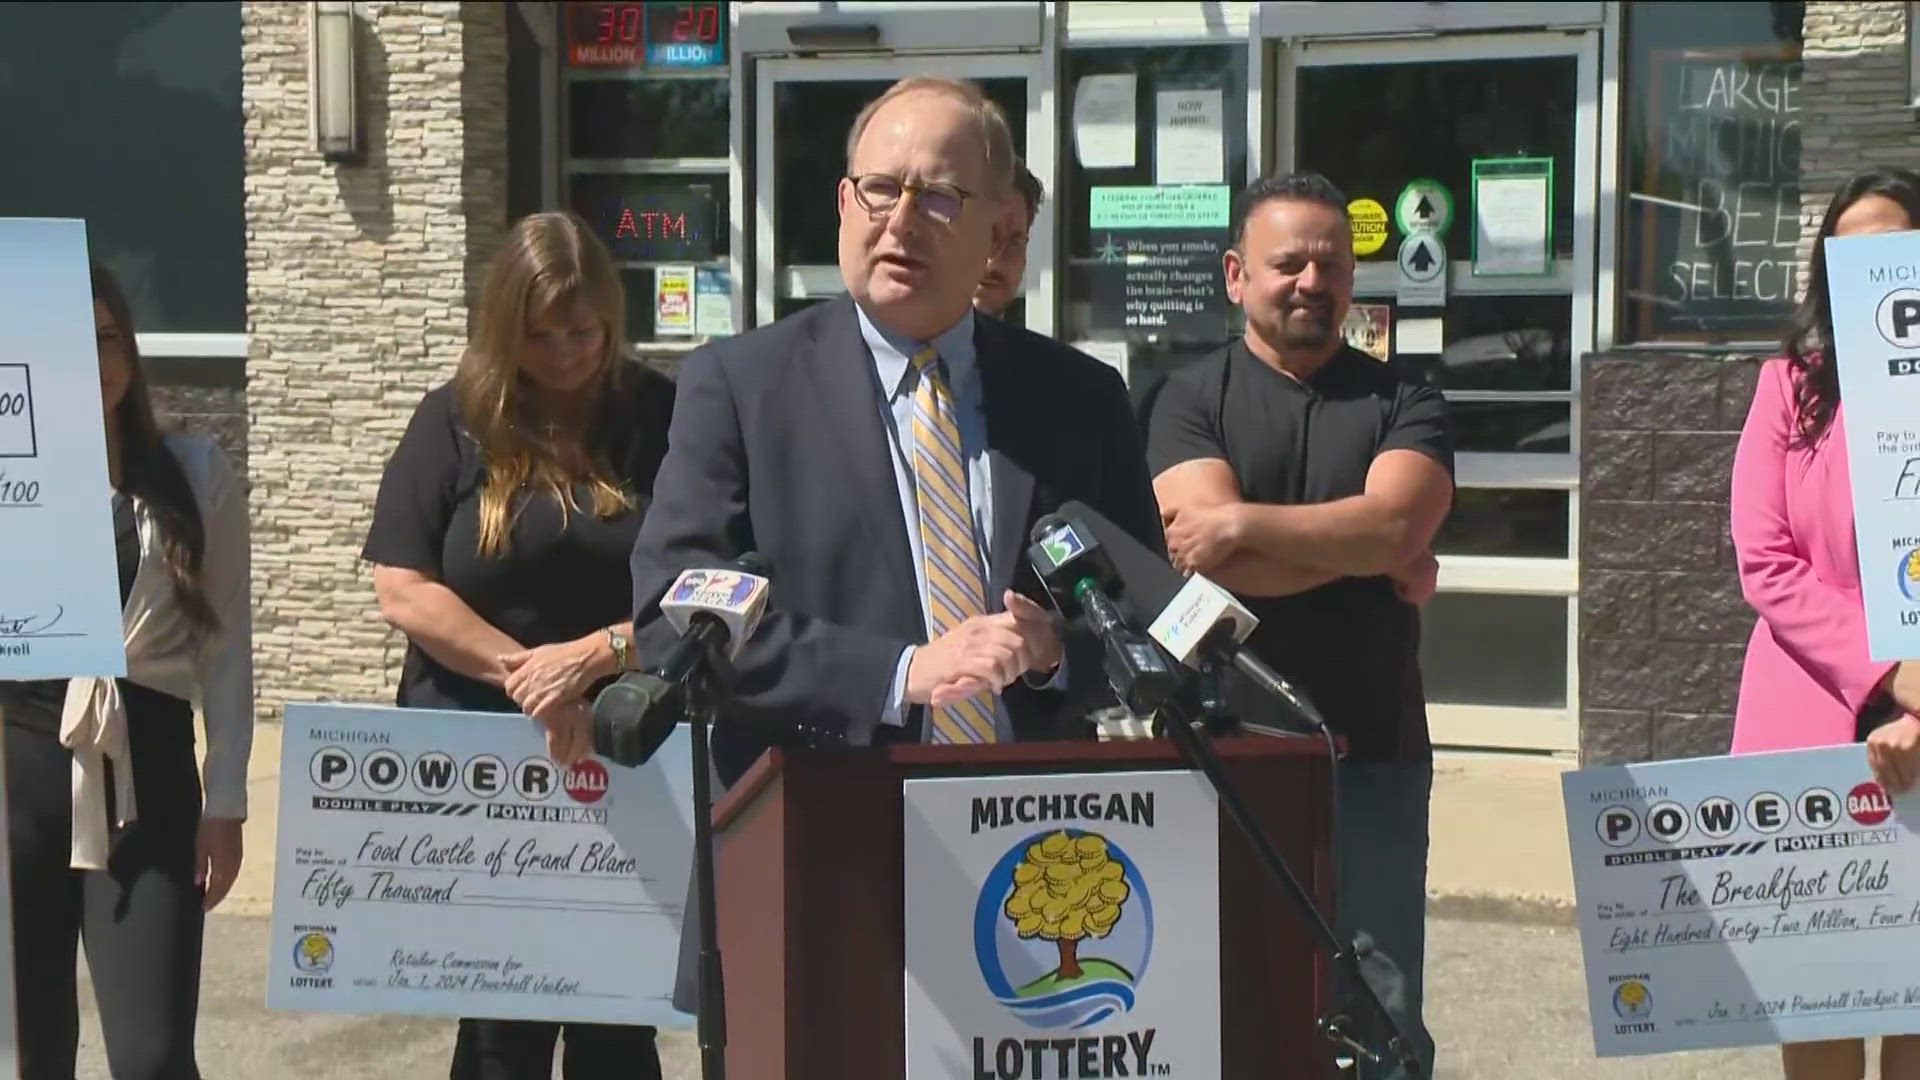 The winning ticket was the first time in the lottery game's history that a Powerball jackpot had been won on New Year's Day.